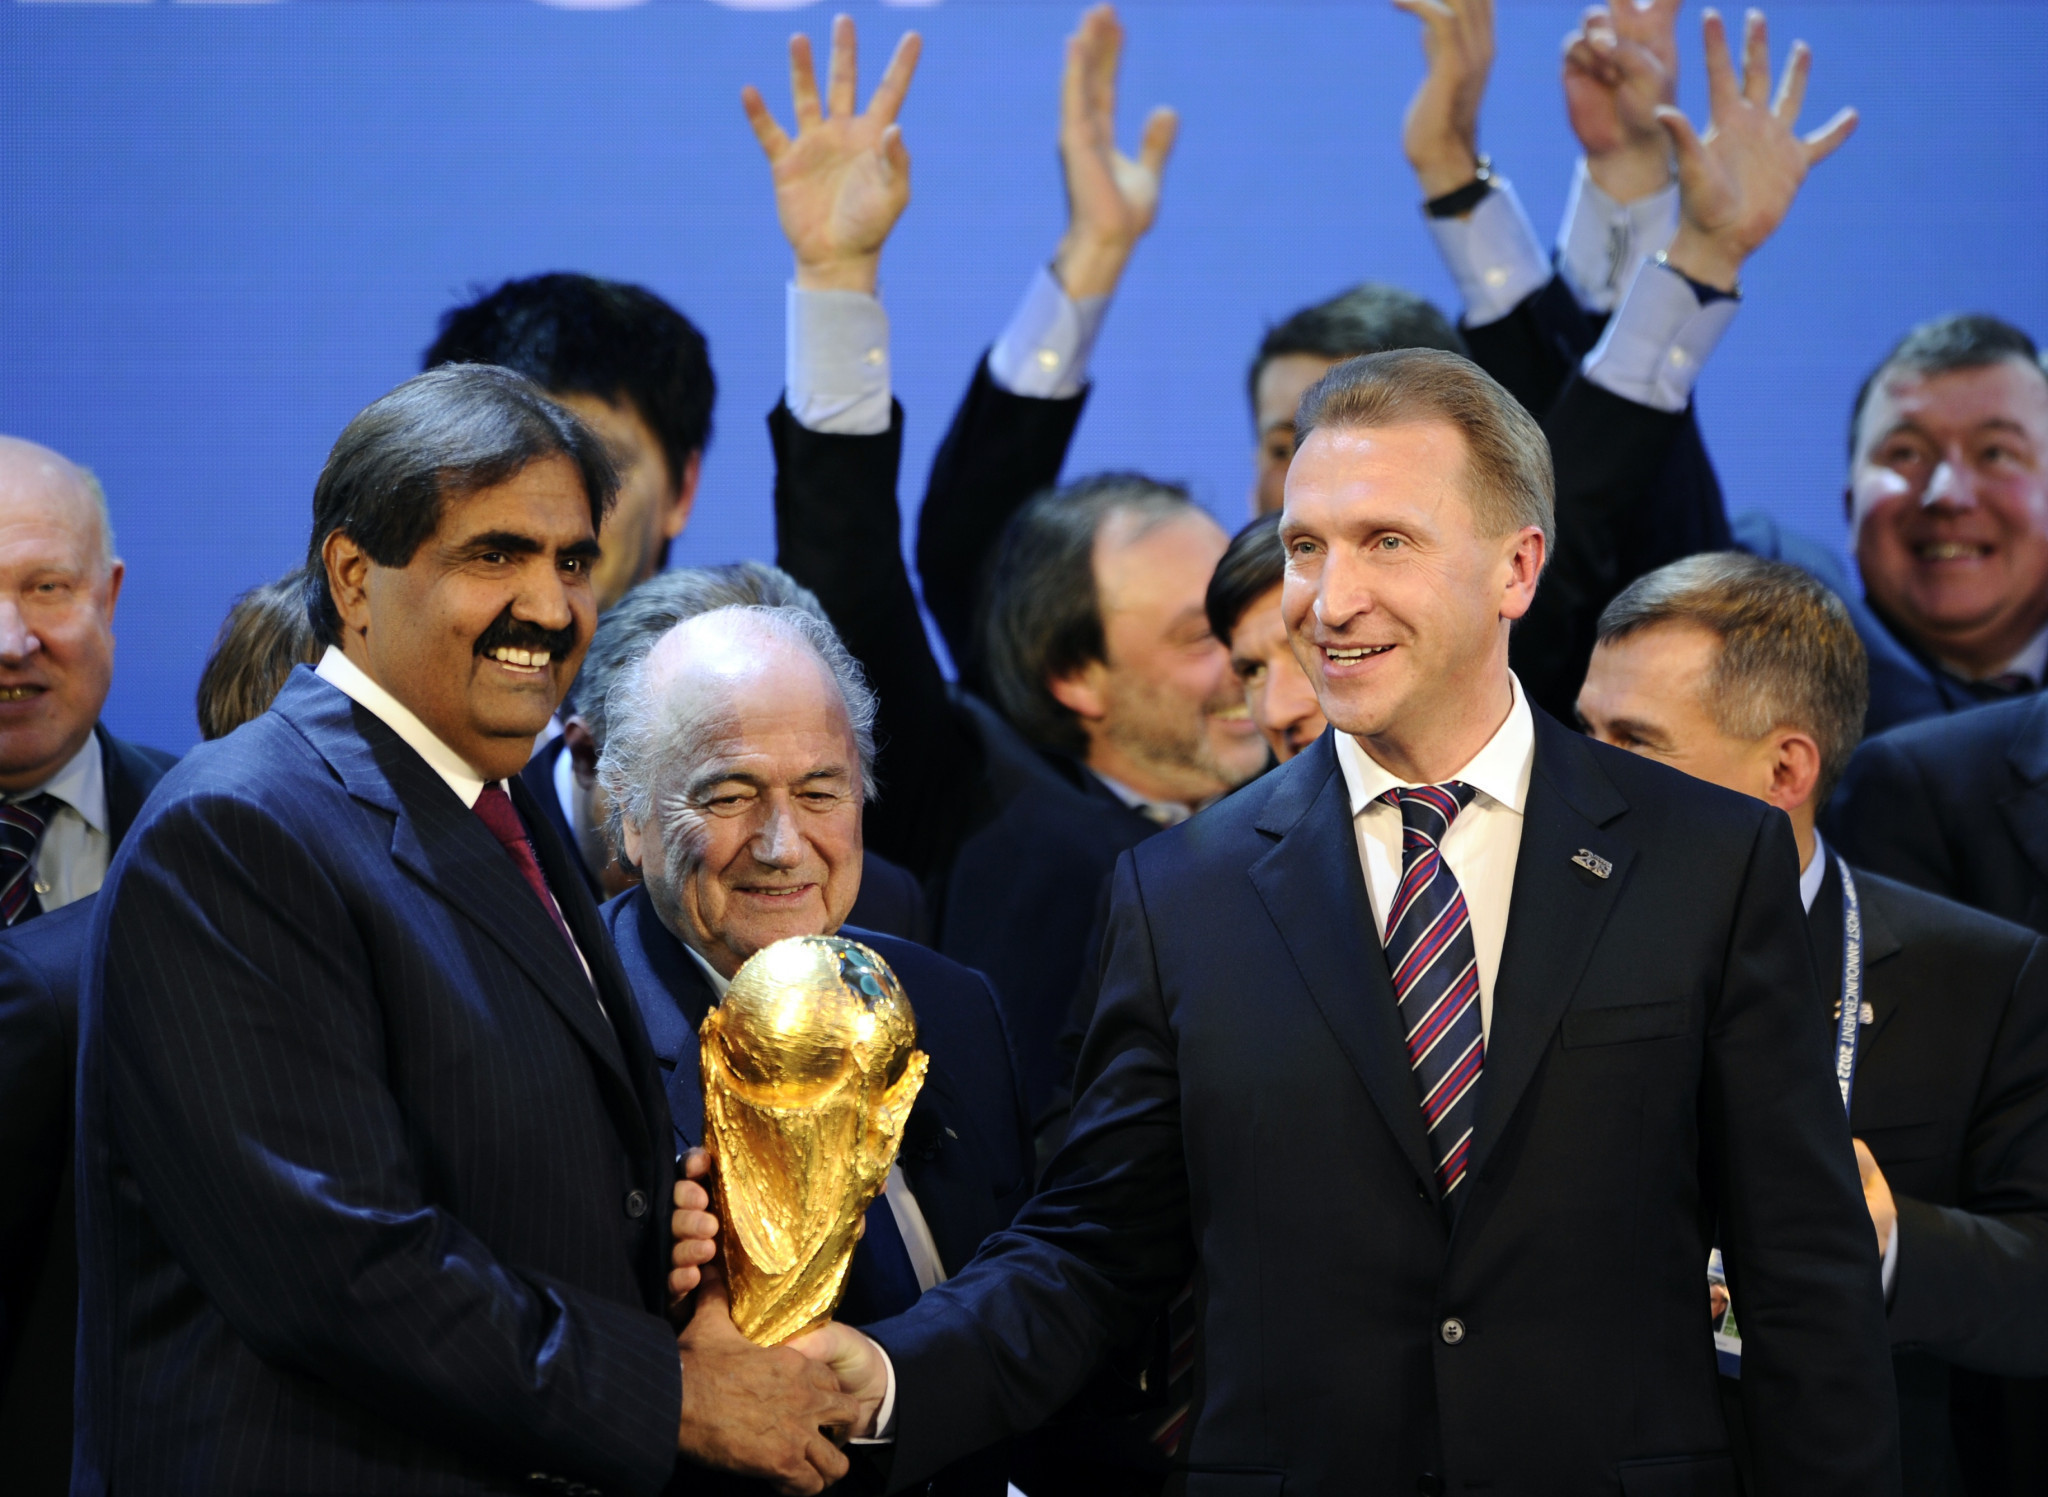 Russia and Qatar were controversially awarded hosting rights for the 2018 and 2022 World Cups in 2010 ©Getty Images